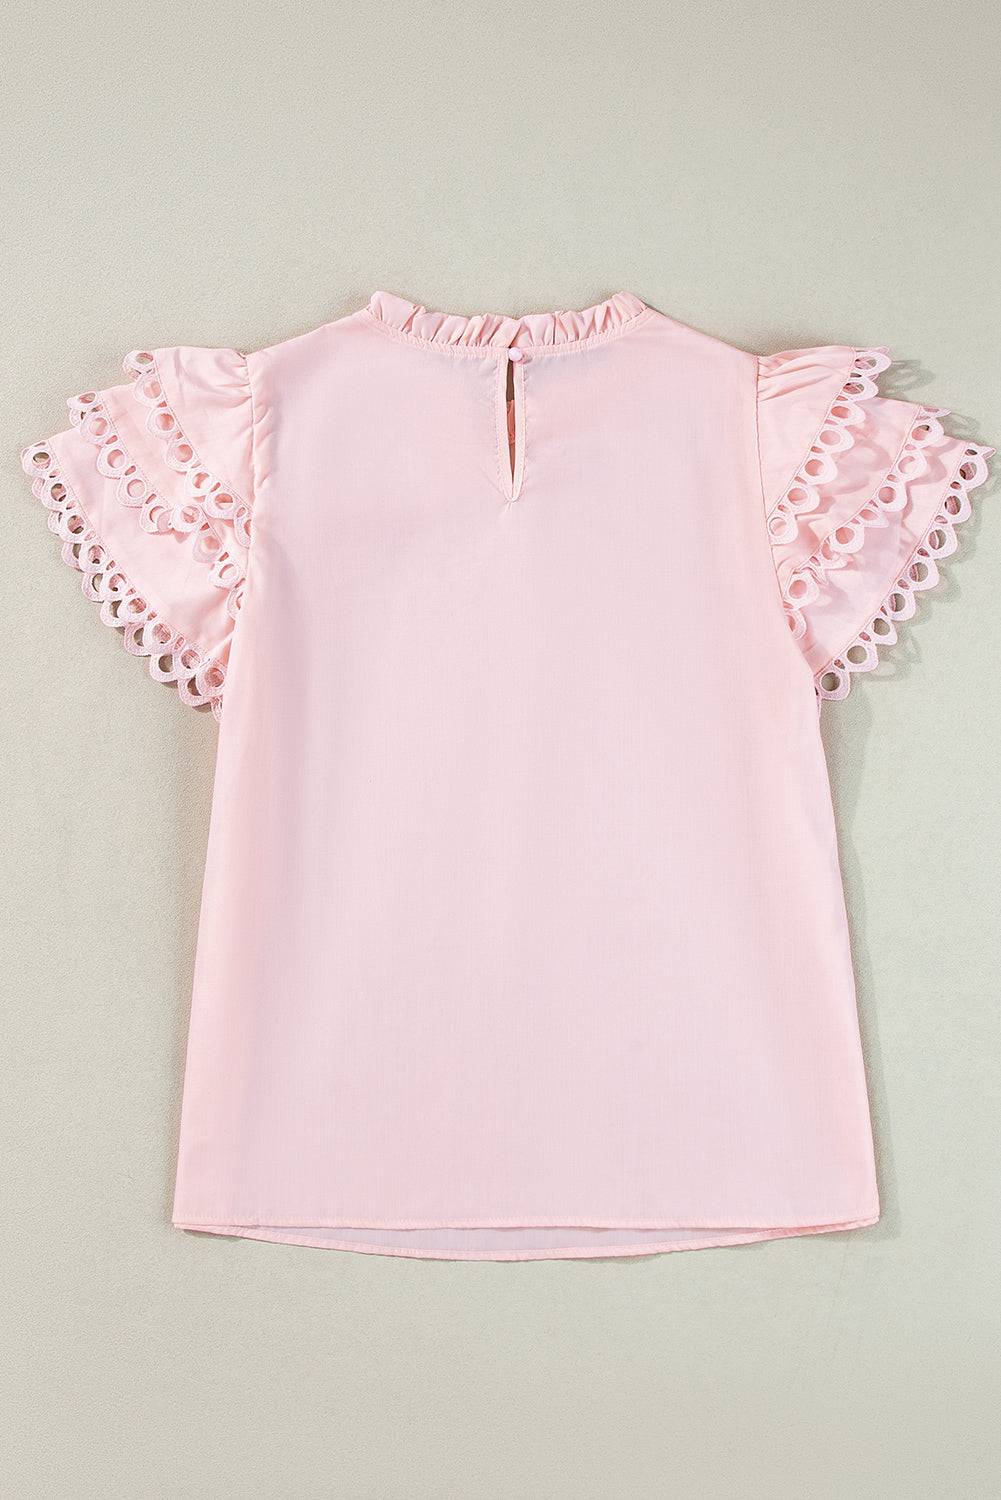 a pink top with ruffles on the sleeves